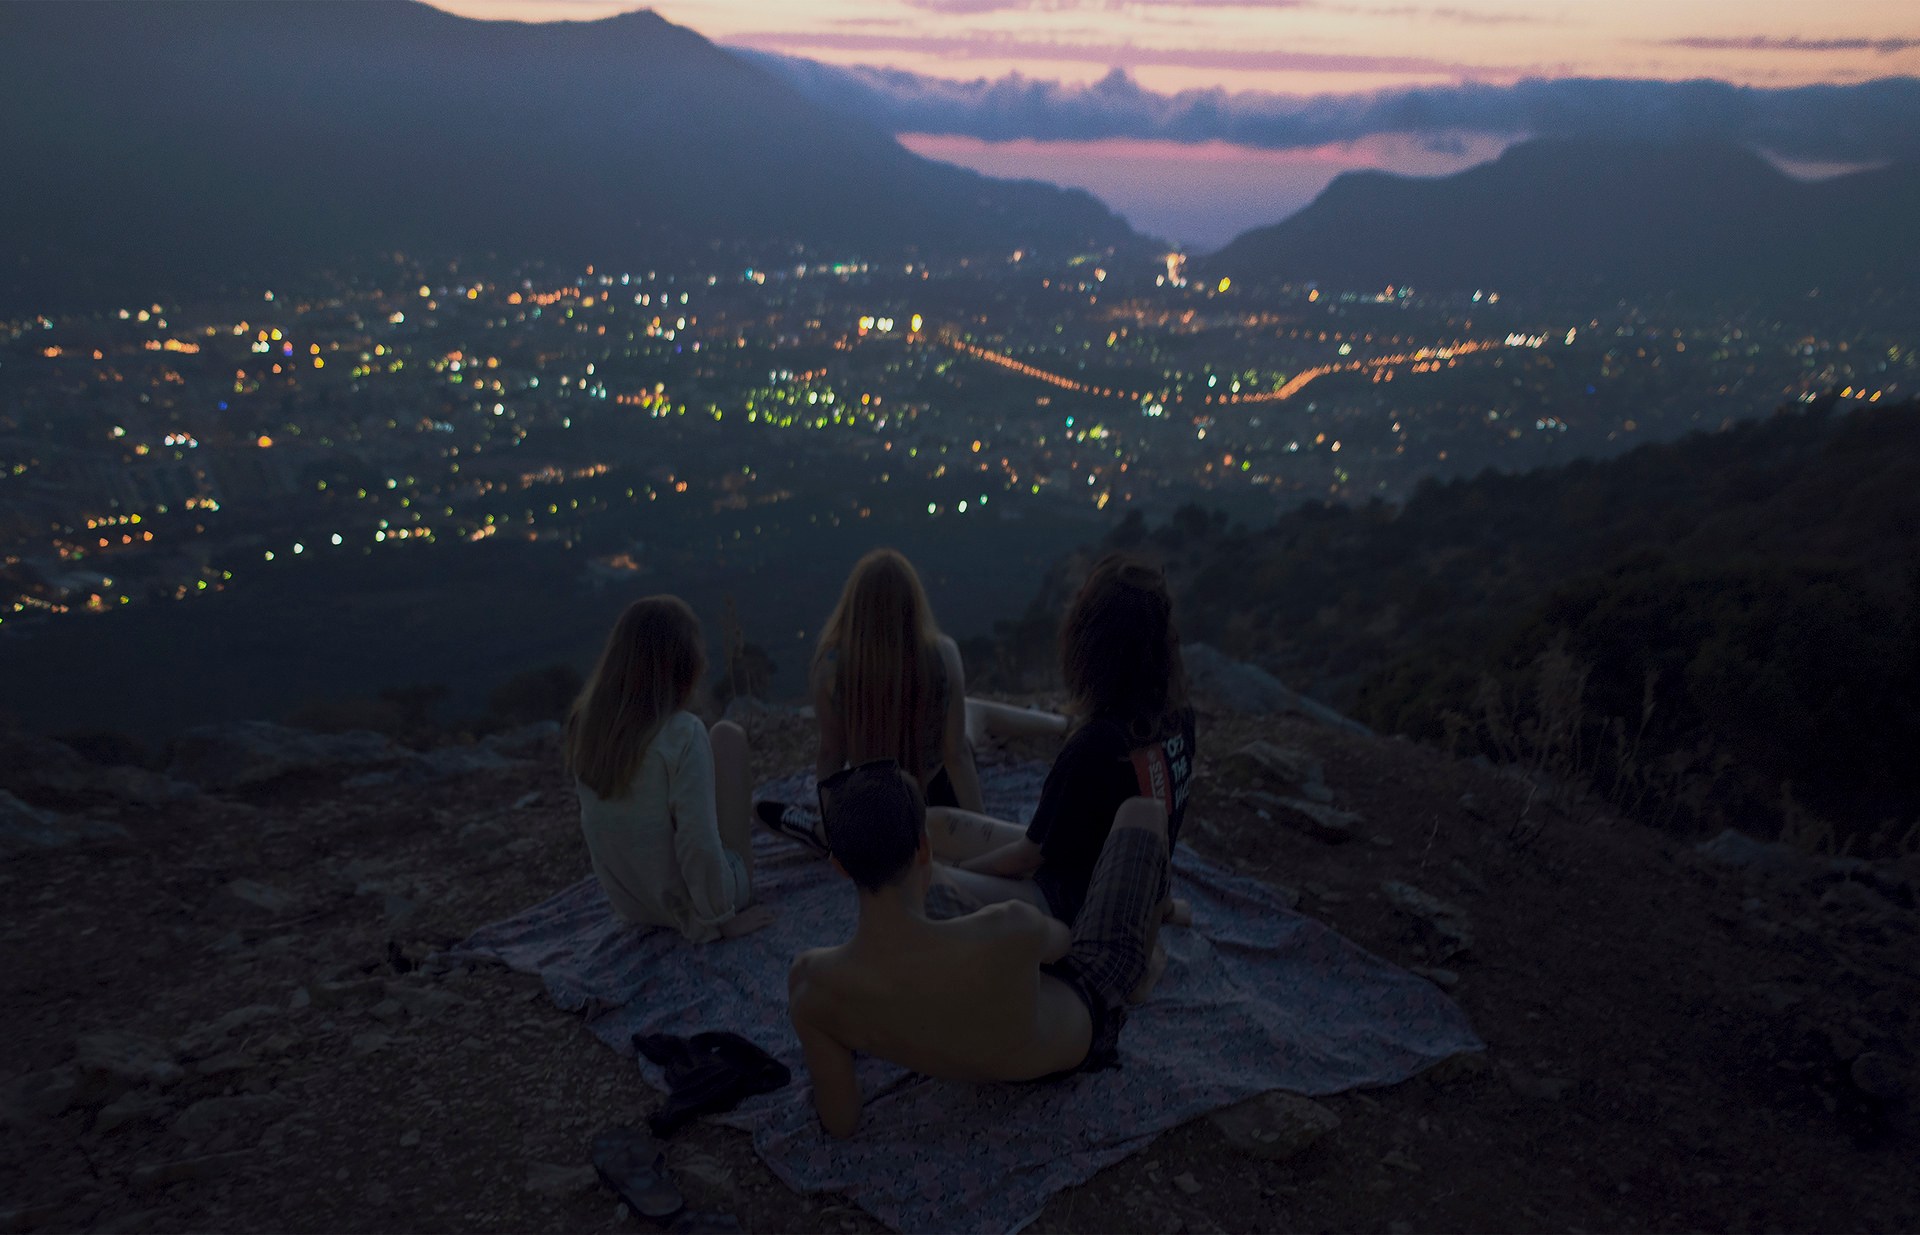 10 Signs You’re Exactly Where You Are Supposed To Be (Even If You Feel A Little Lost)